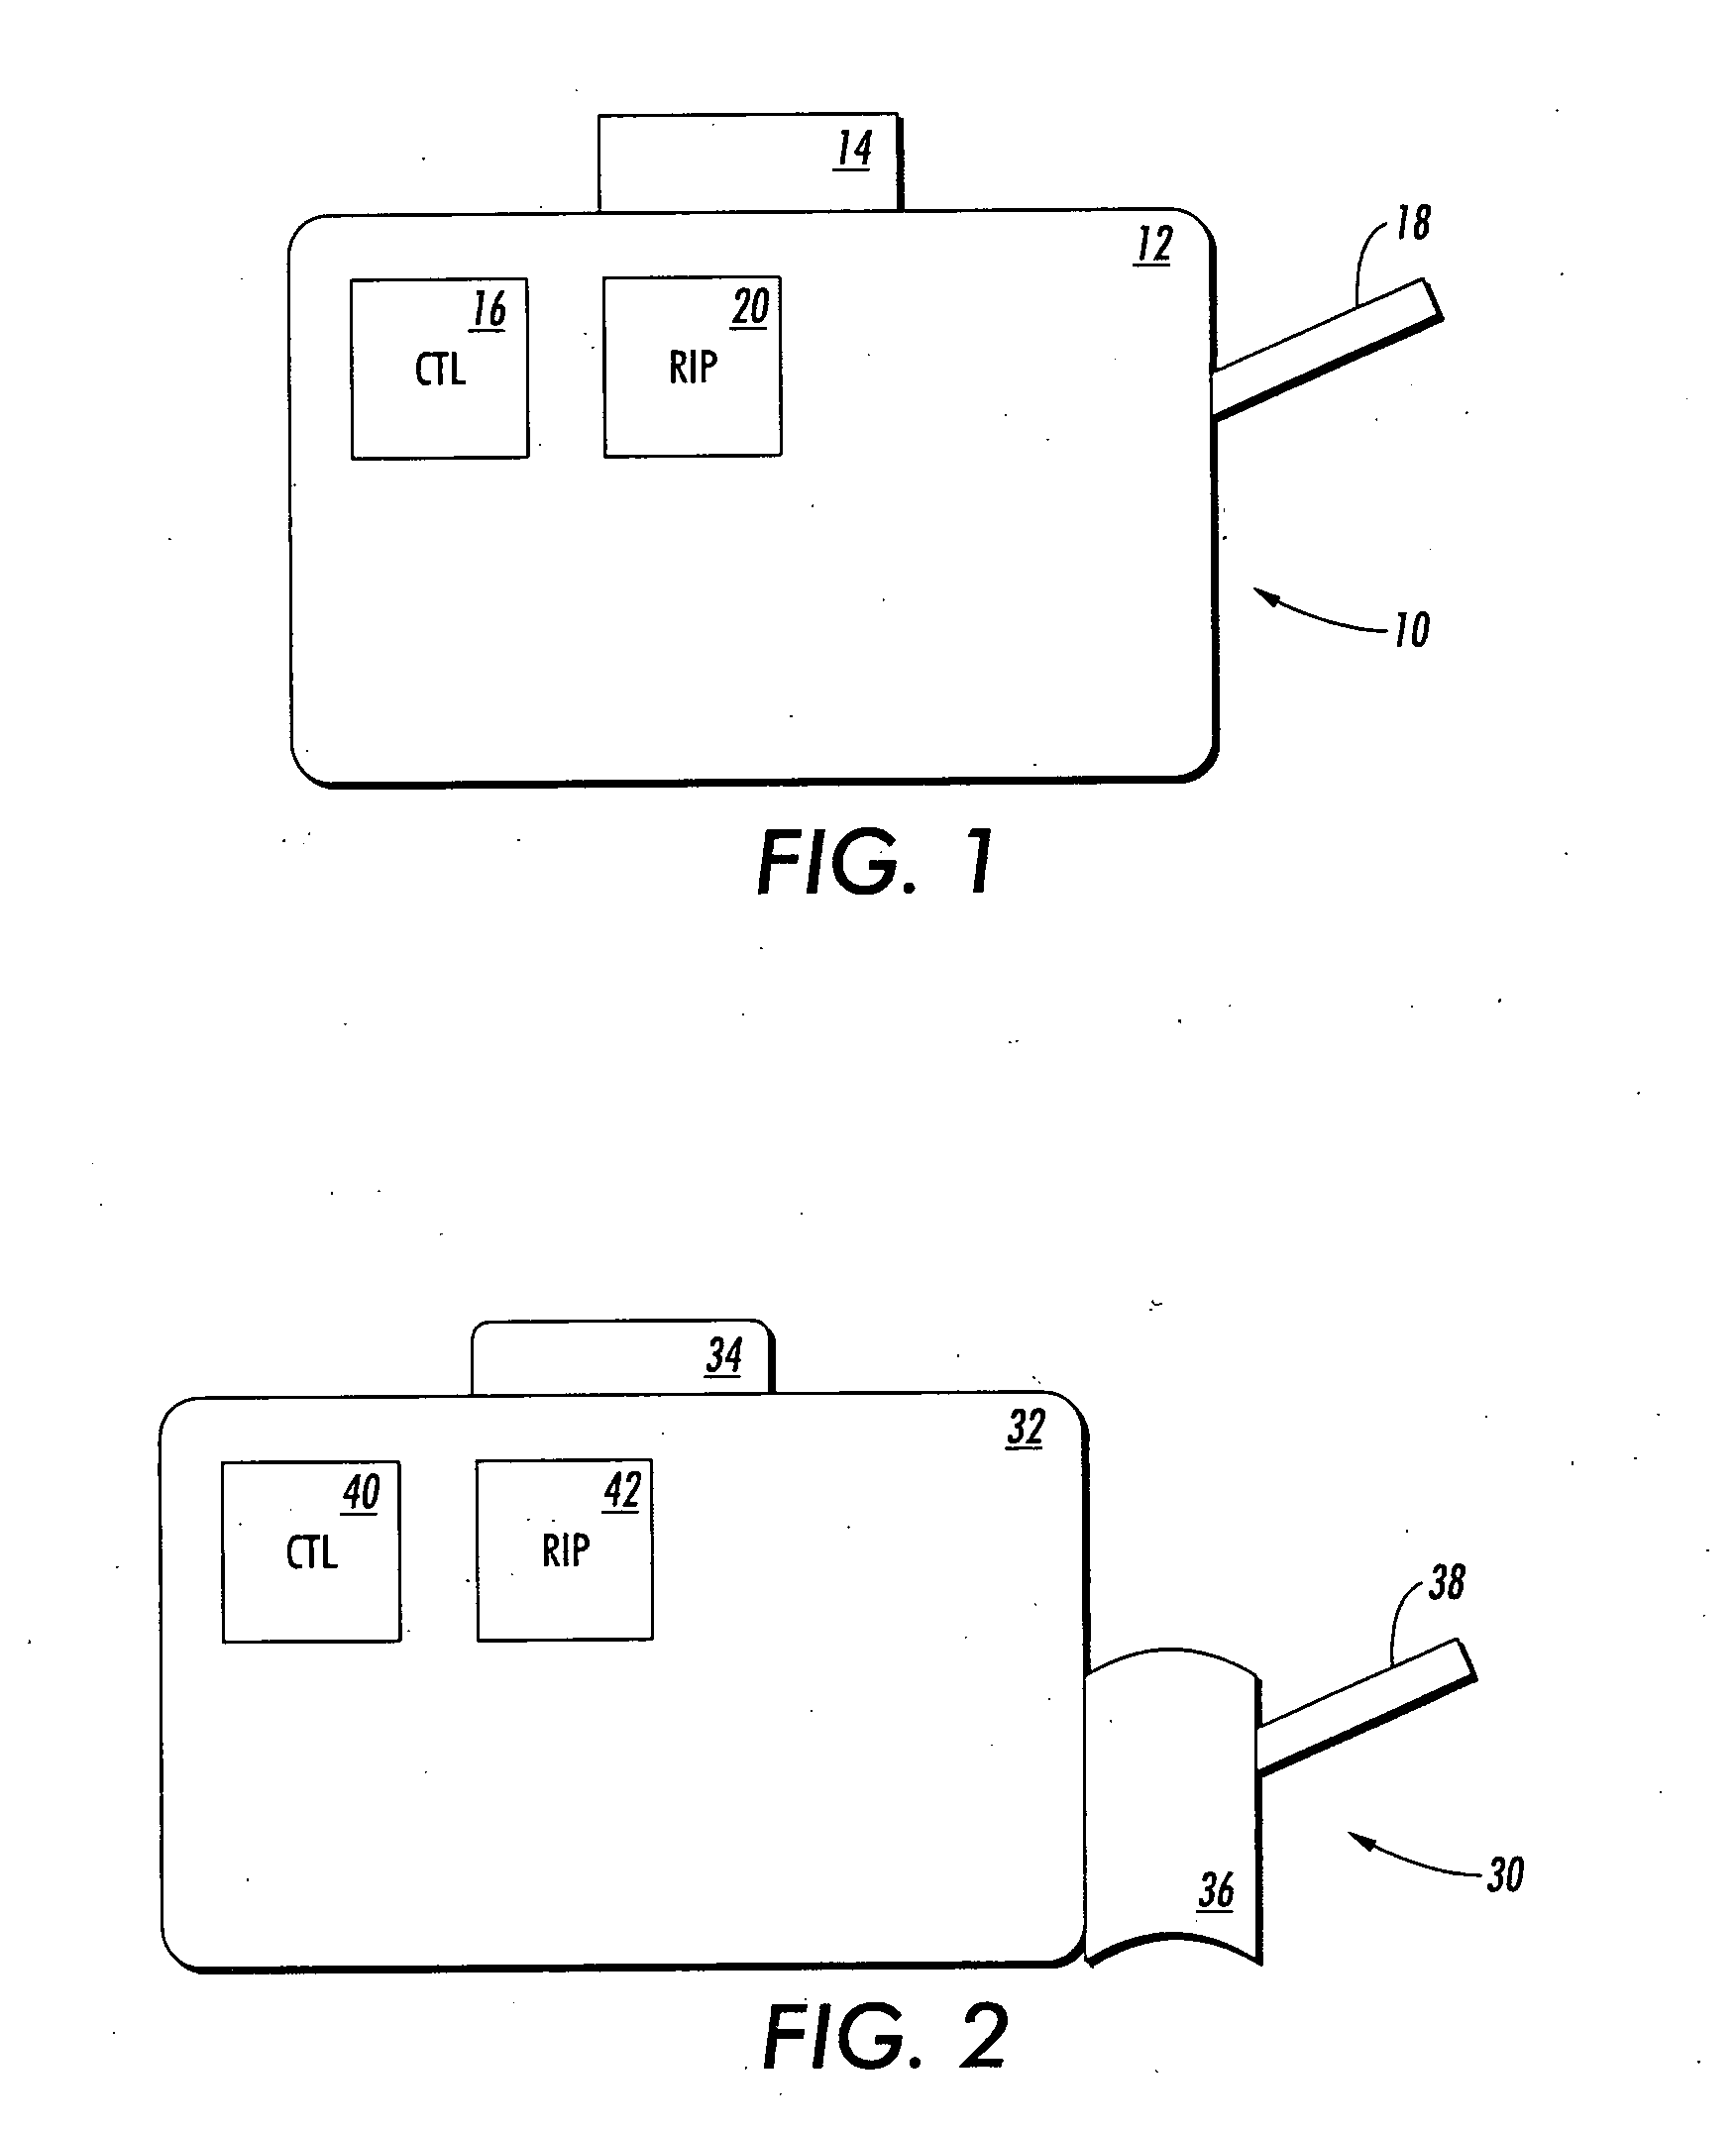 Method and system for forming temporary images